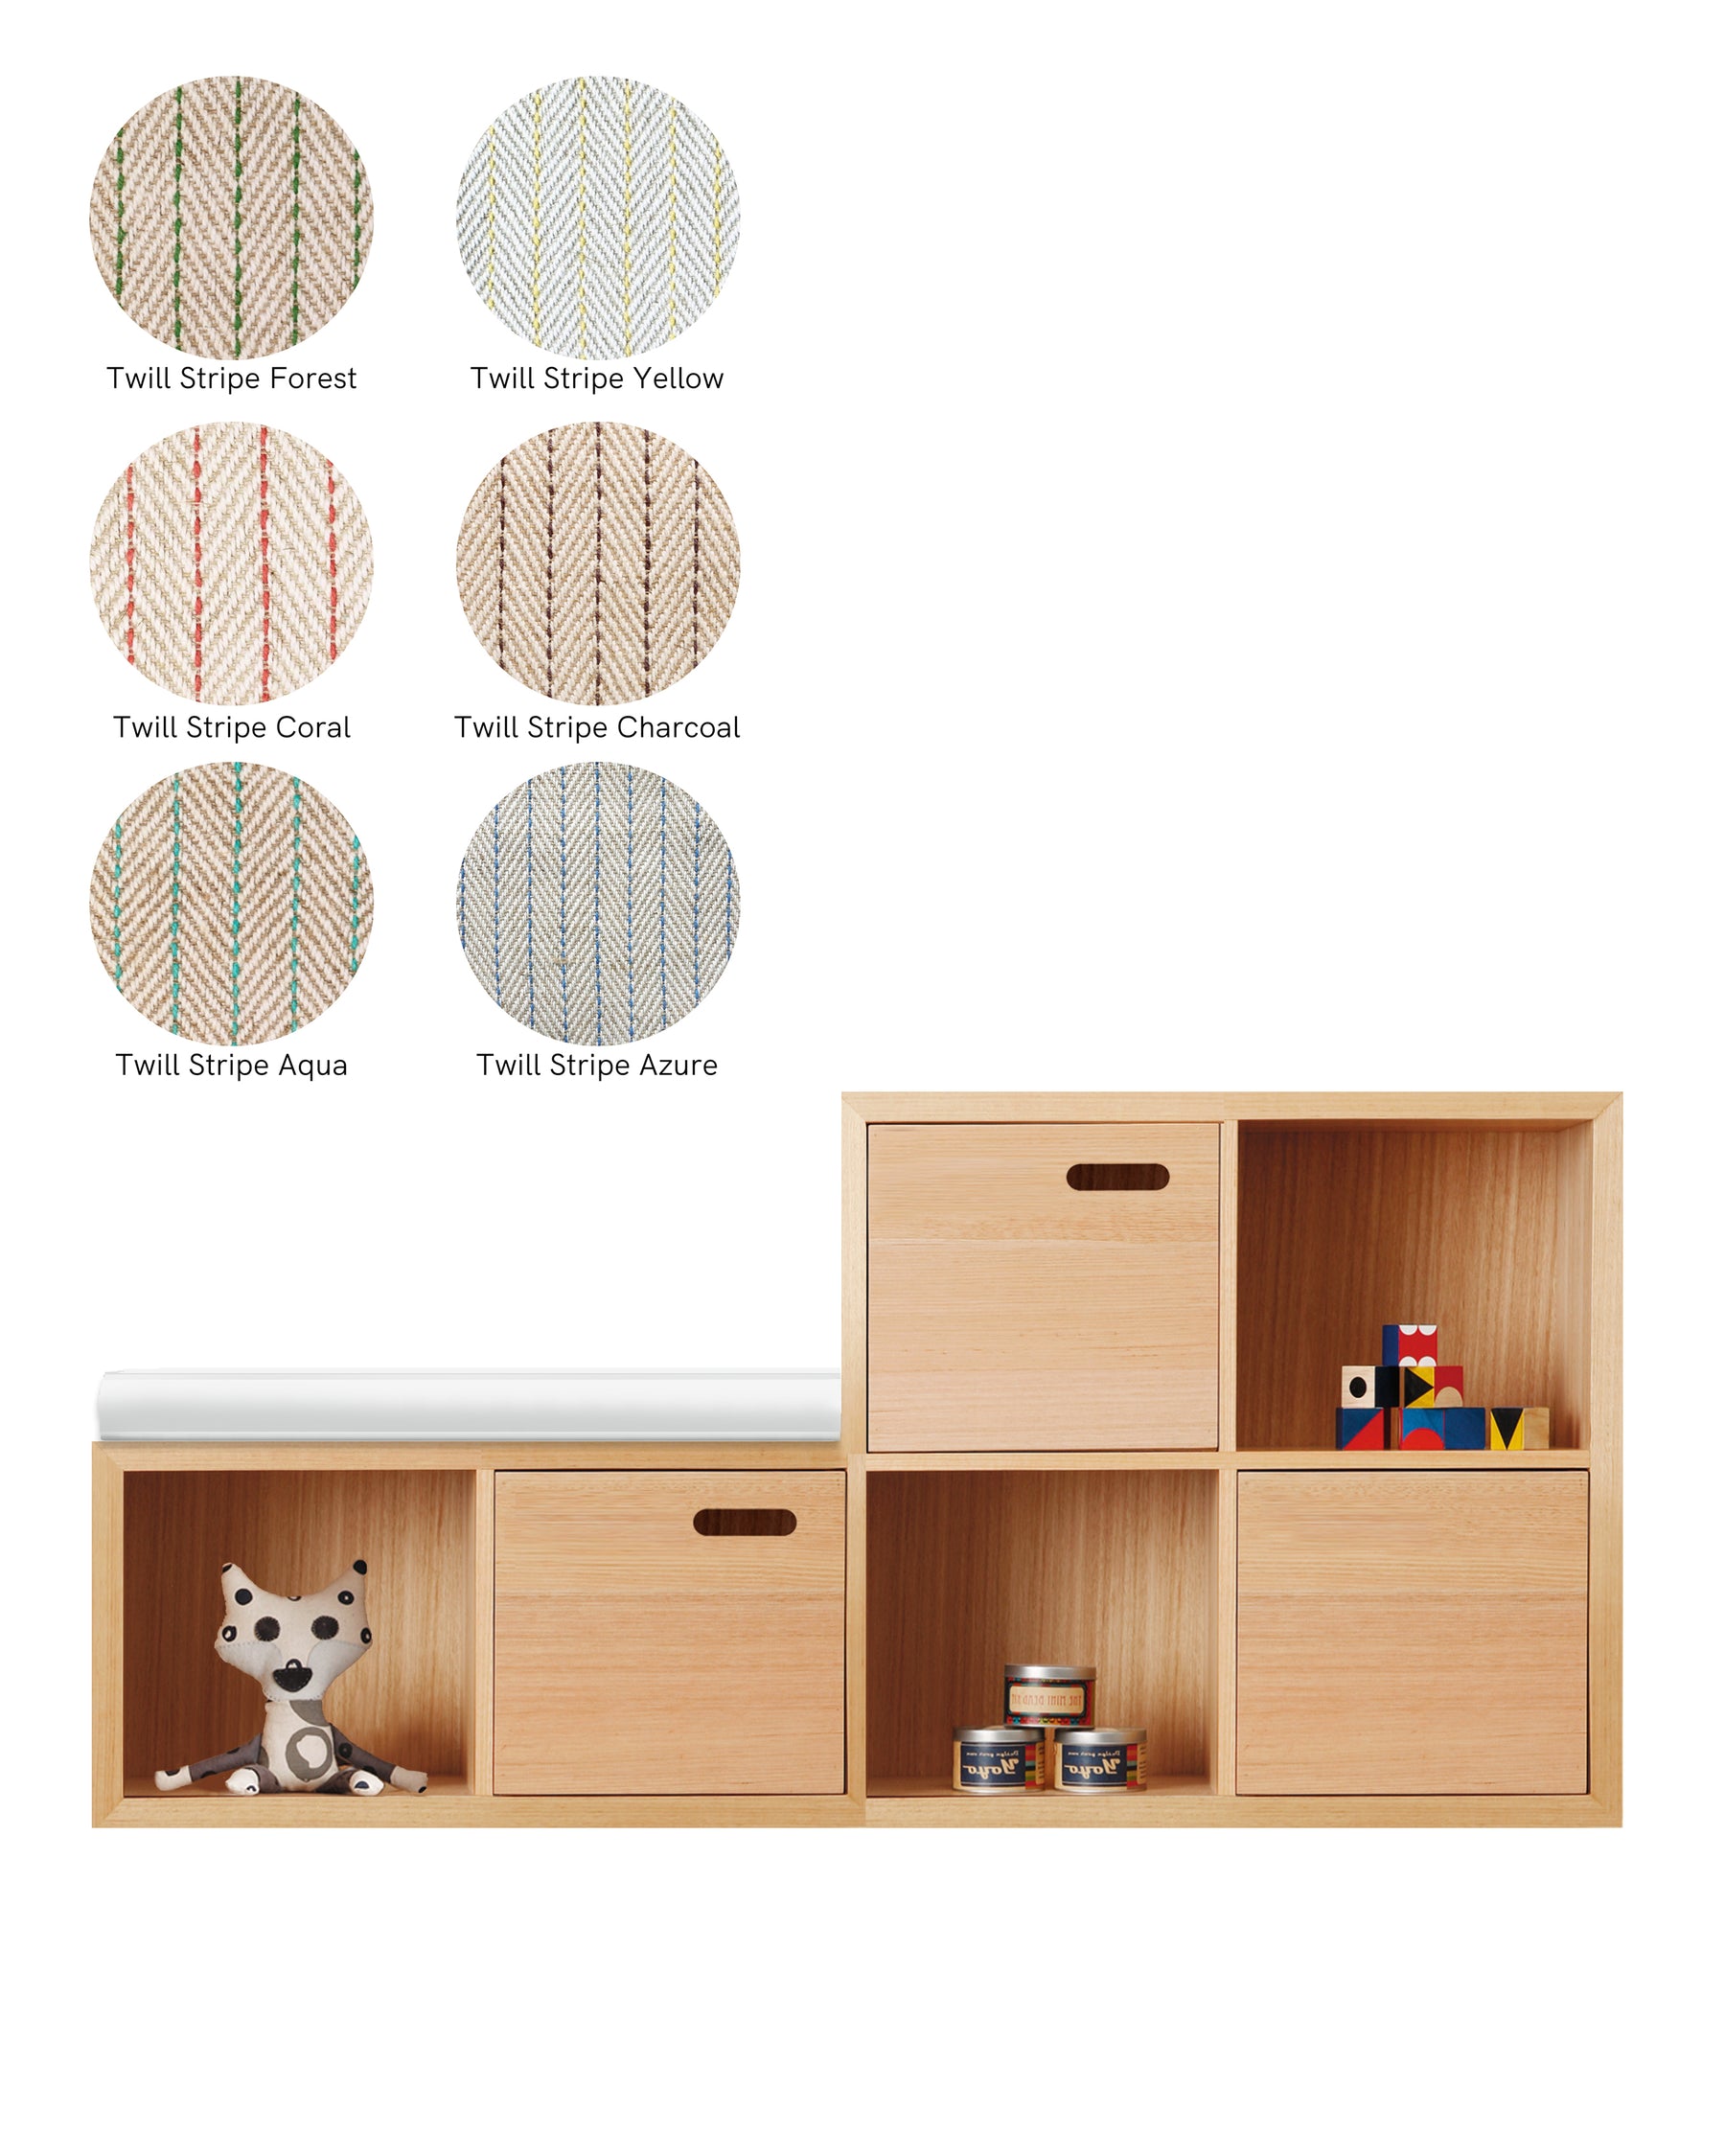 SCOOP BOOKCASE  |  6 CUBE RIGHT